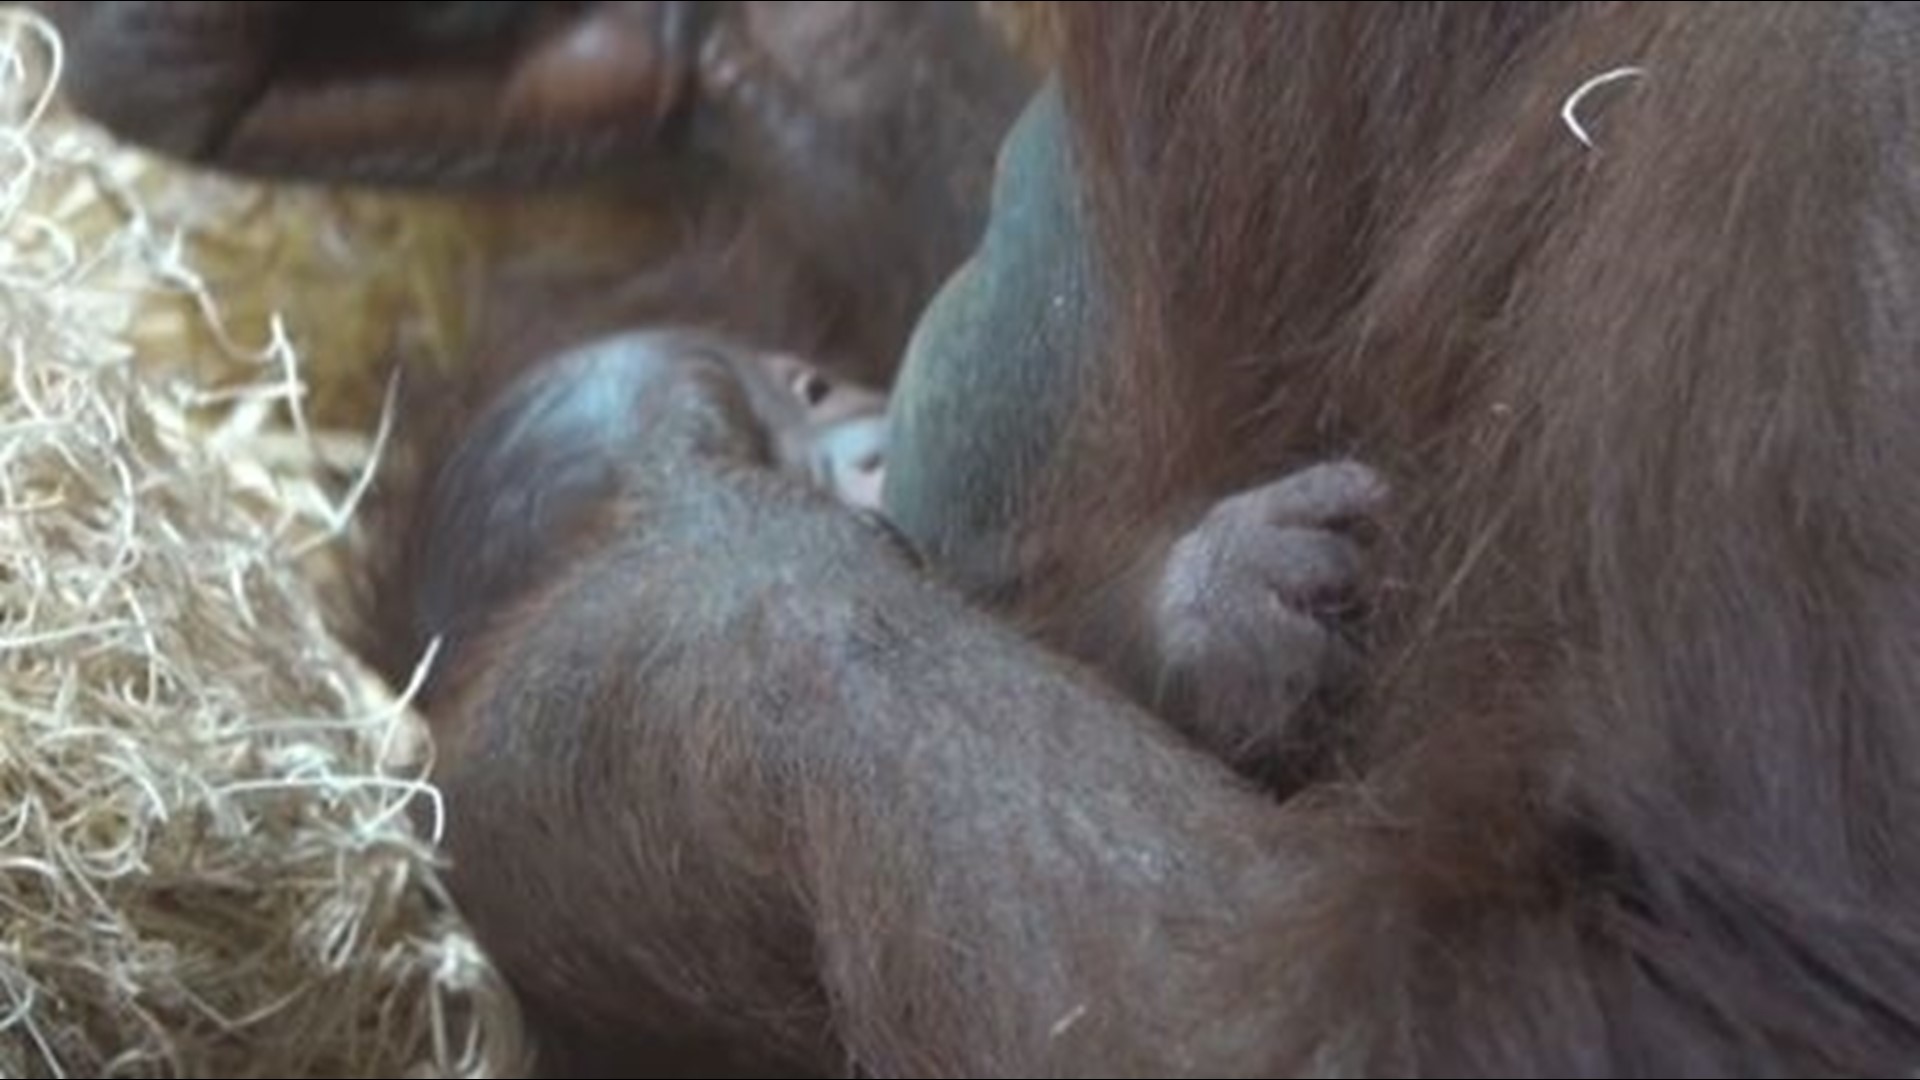 A bundle of joy was delivered in the form of a baby orangutan at the Oregon Zoo as 20-year-old Bornean orangutan Kitra had her first baby on April 13.